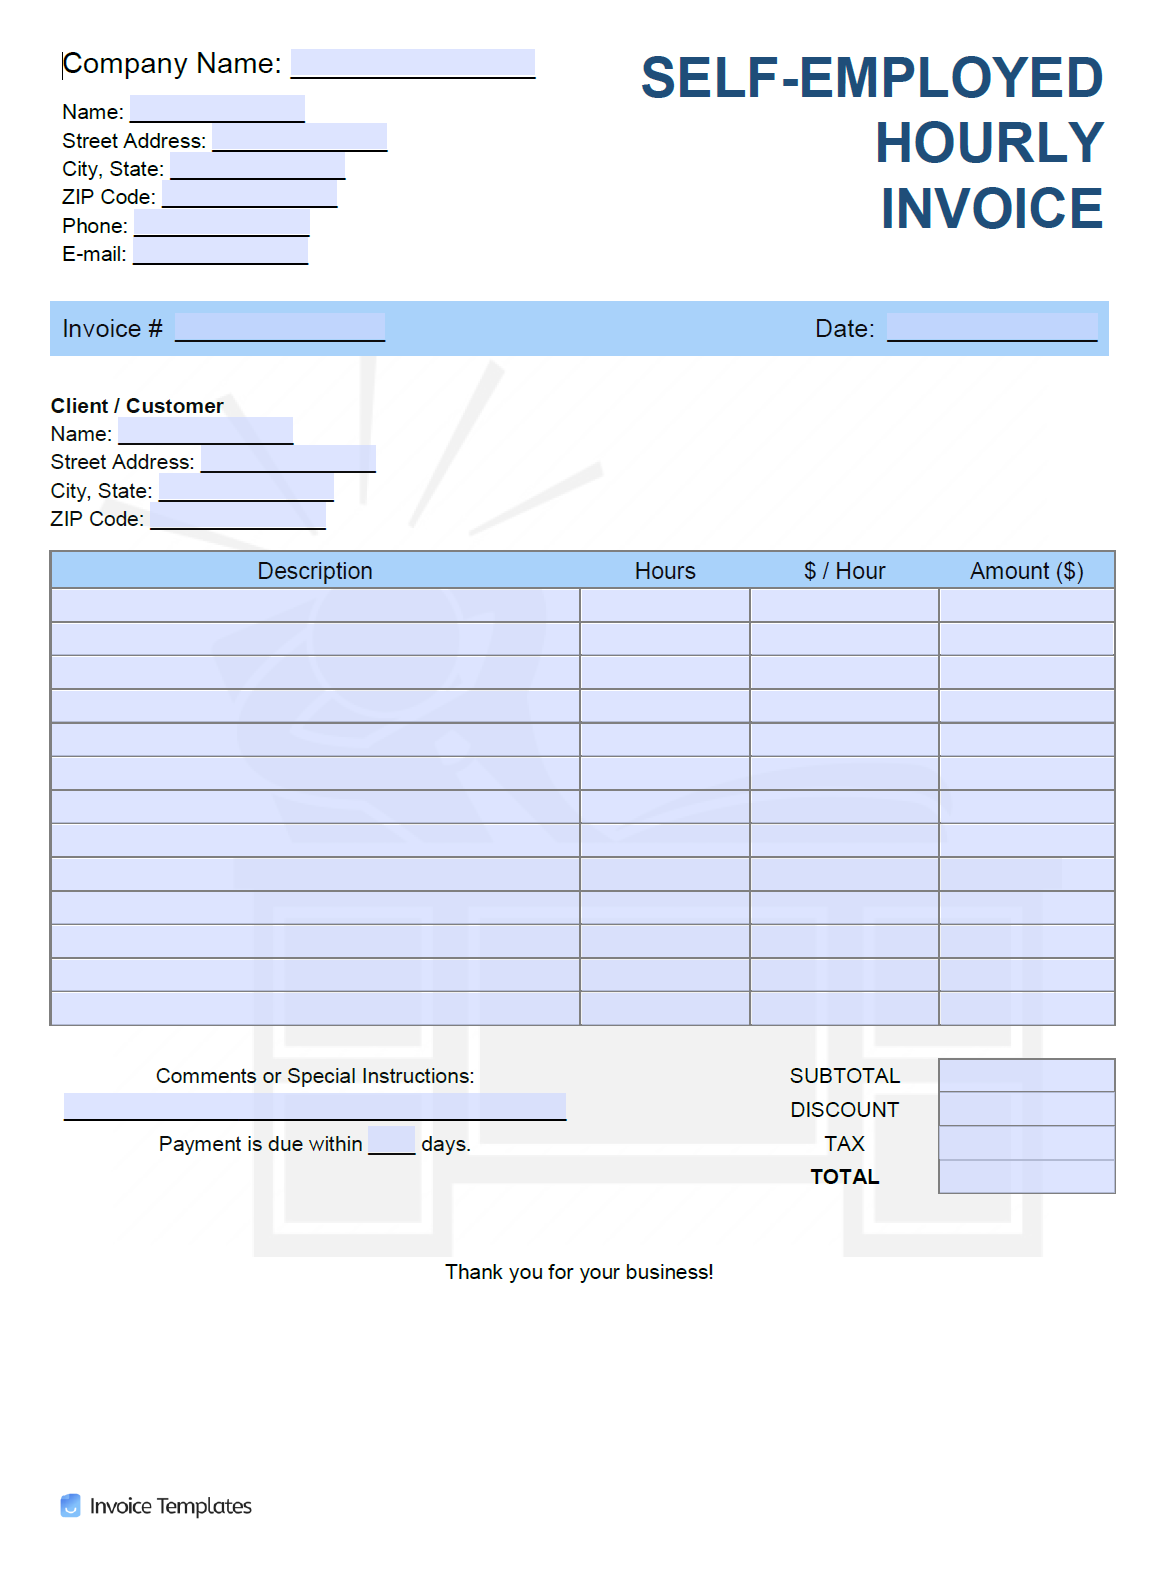 self-employed-invoice-template-free-printable-templates